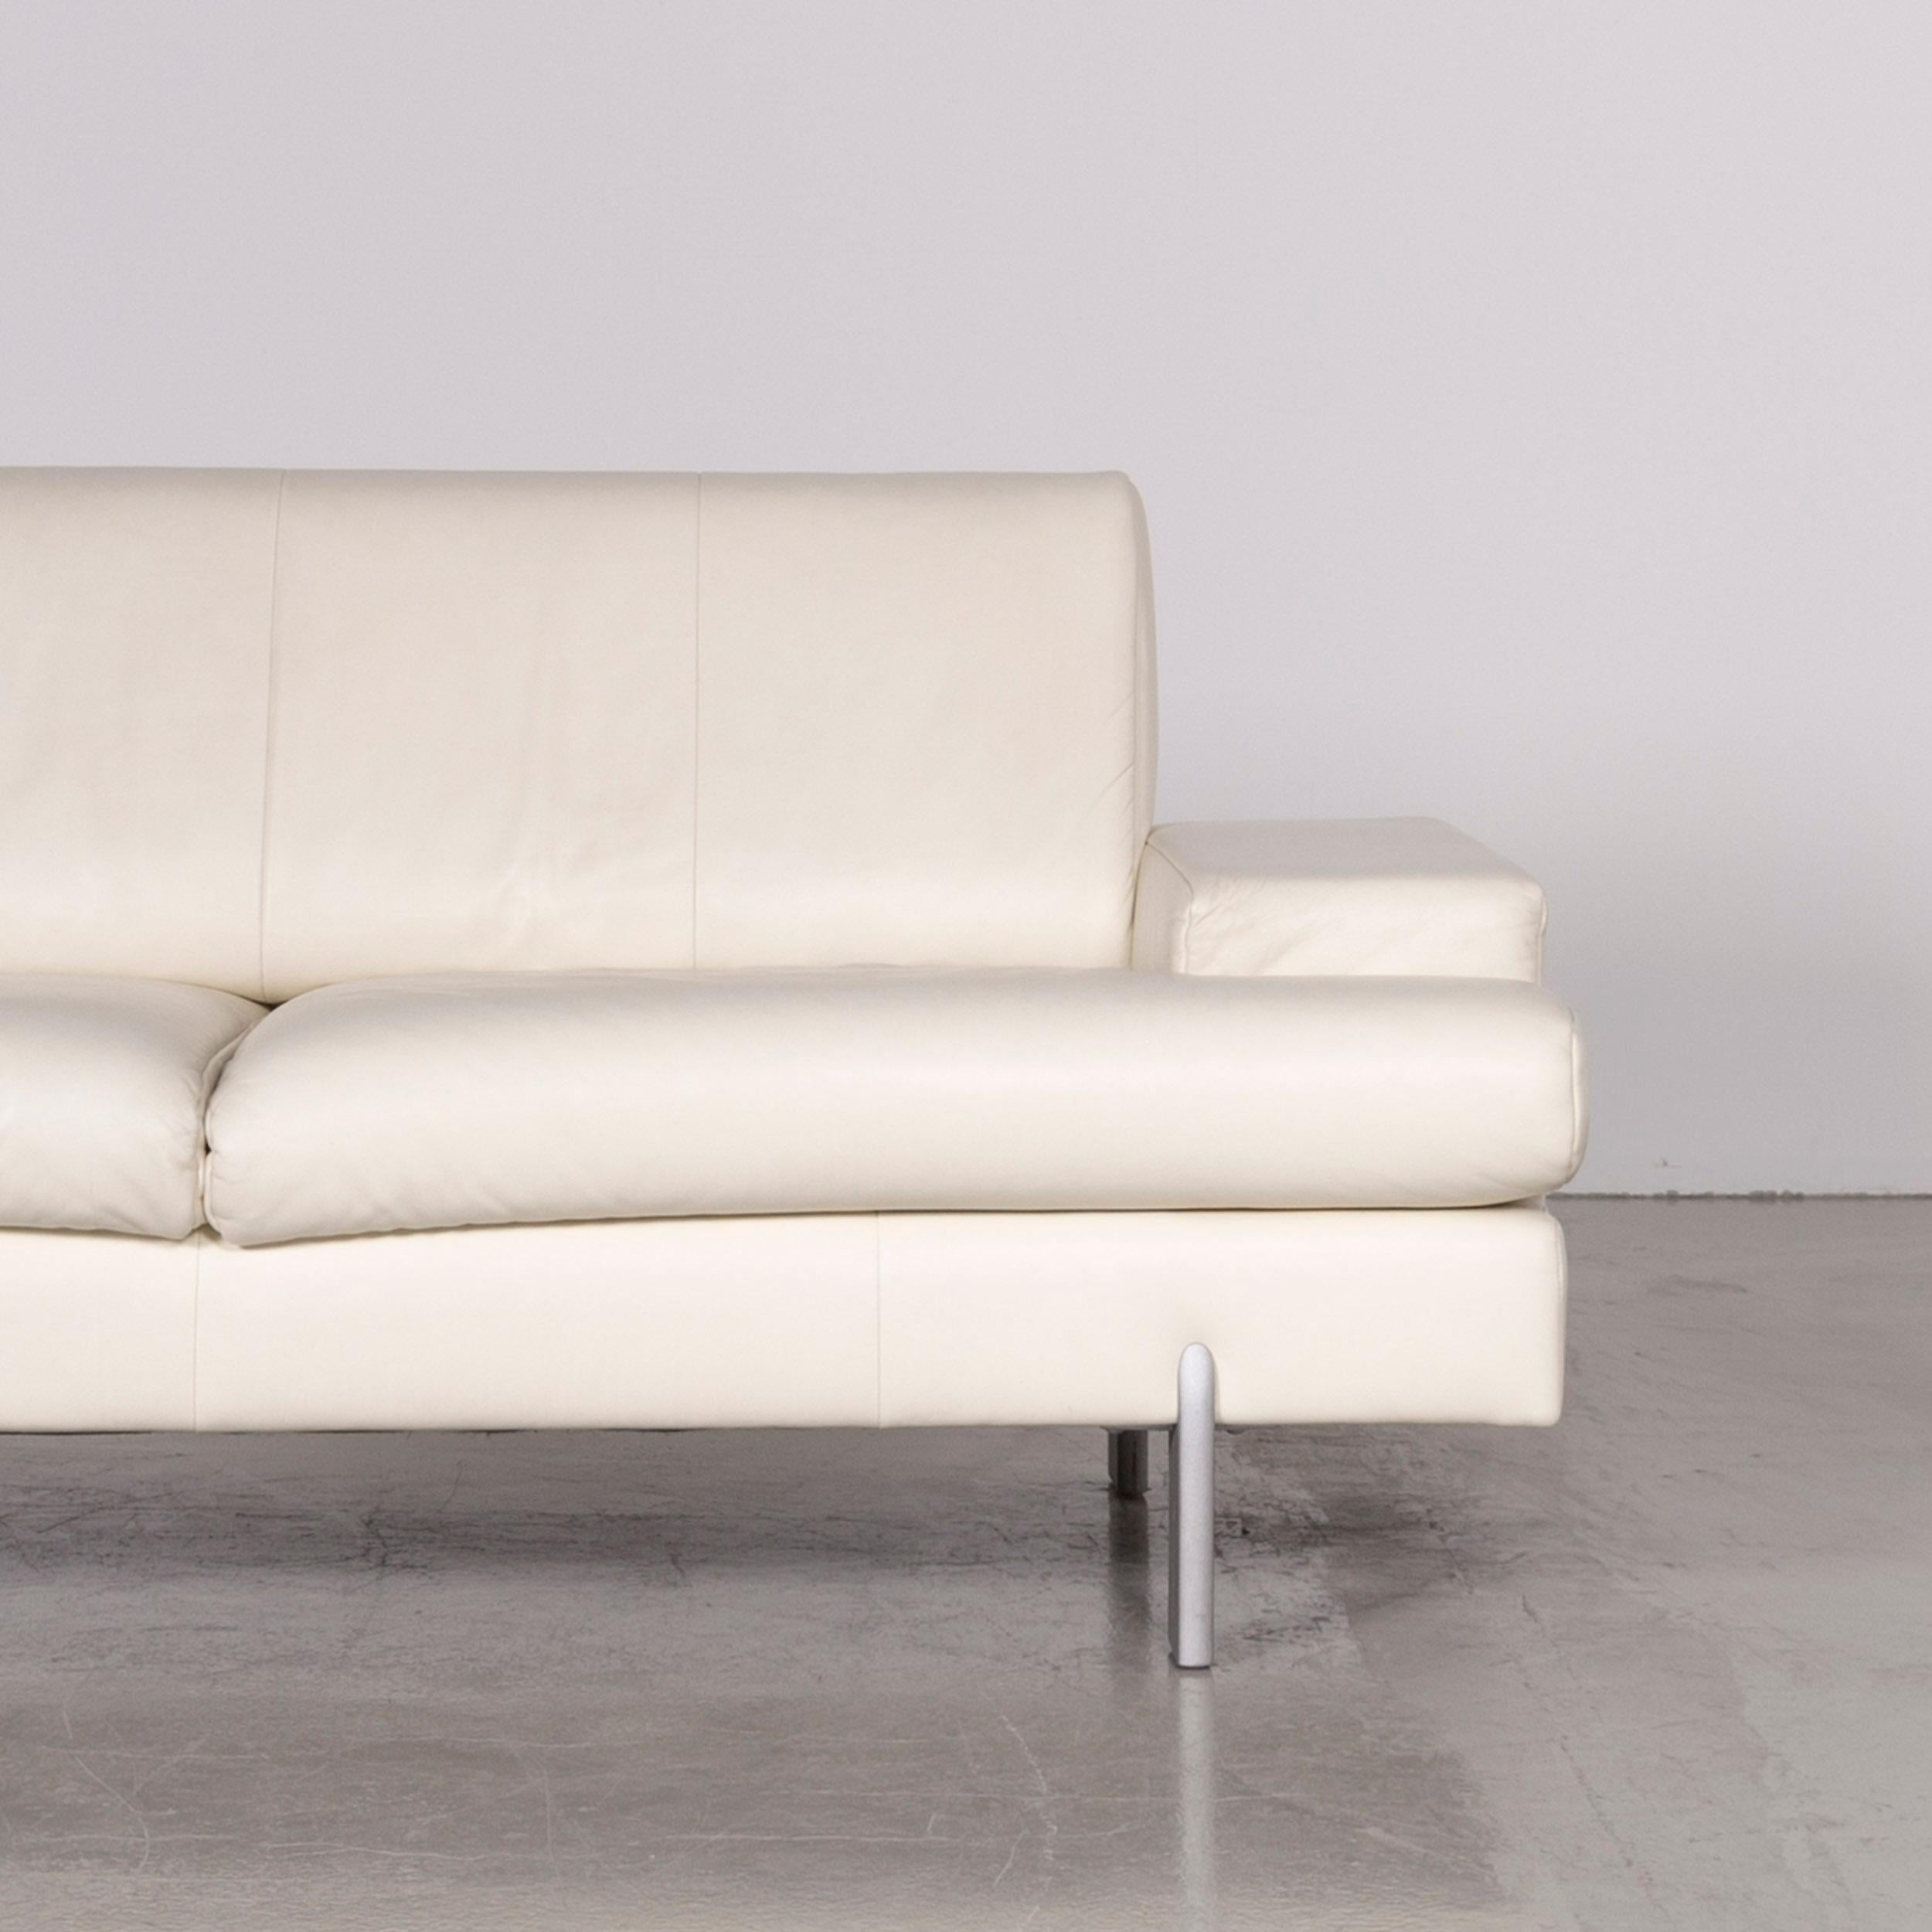 Rolf Benz Designer Leather Sofa Creme Three-Seat Couch In Good Condition For Sale In Cologne, DE